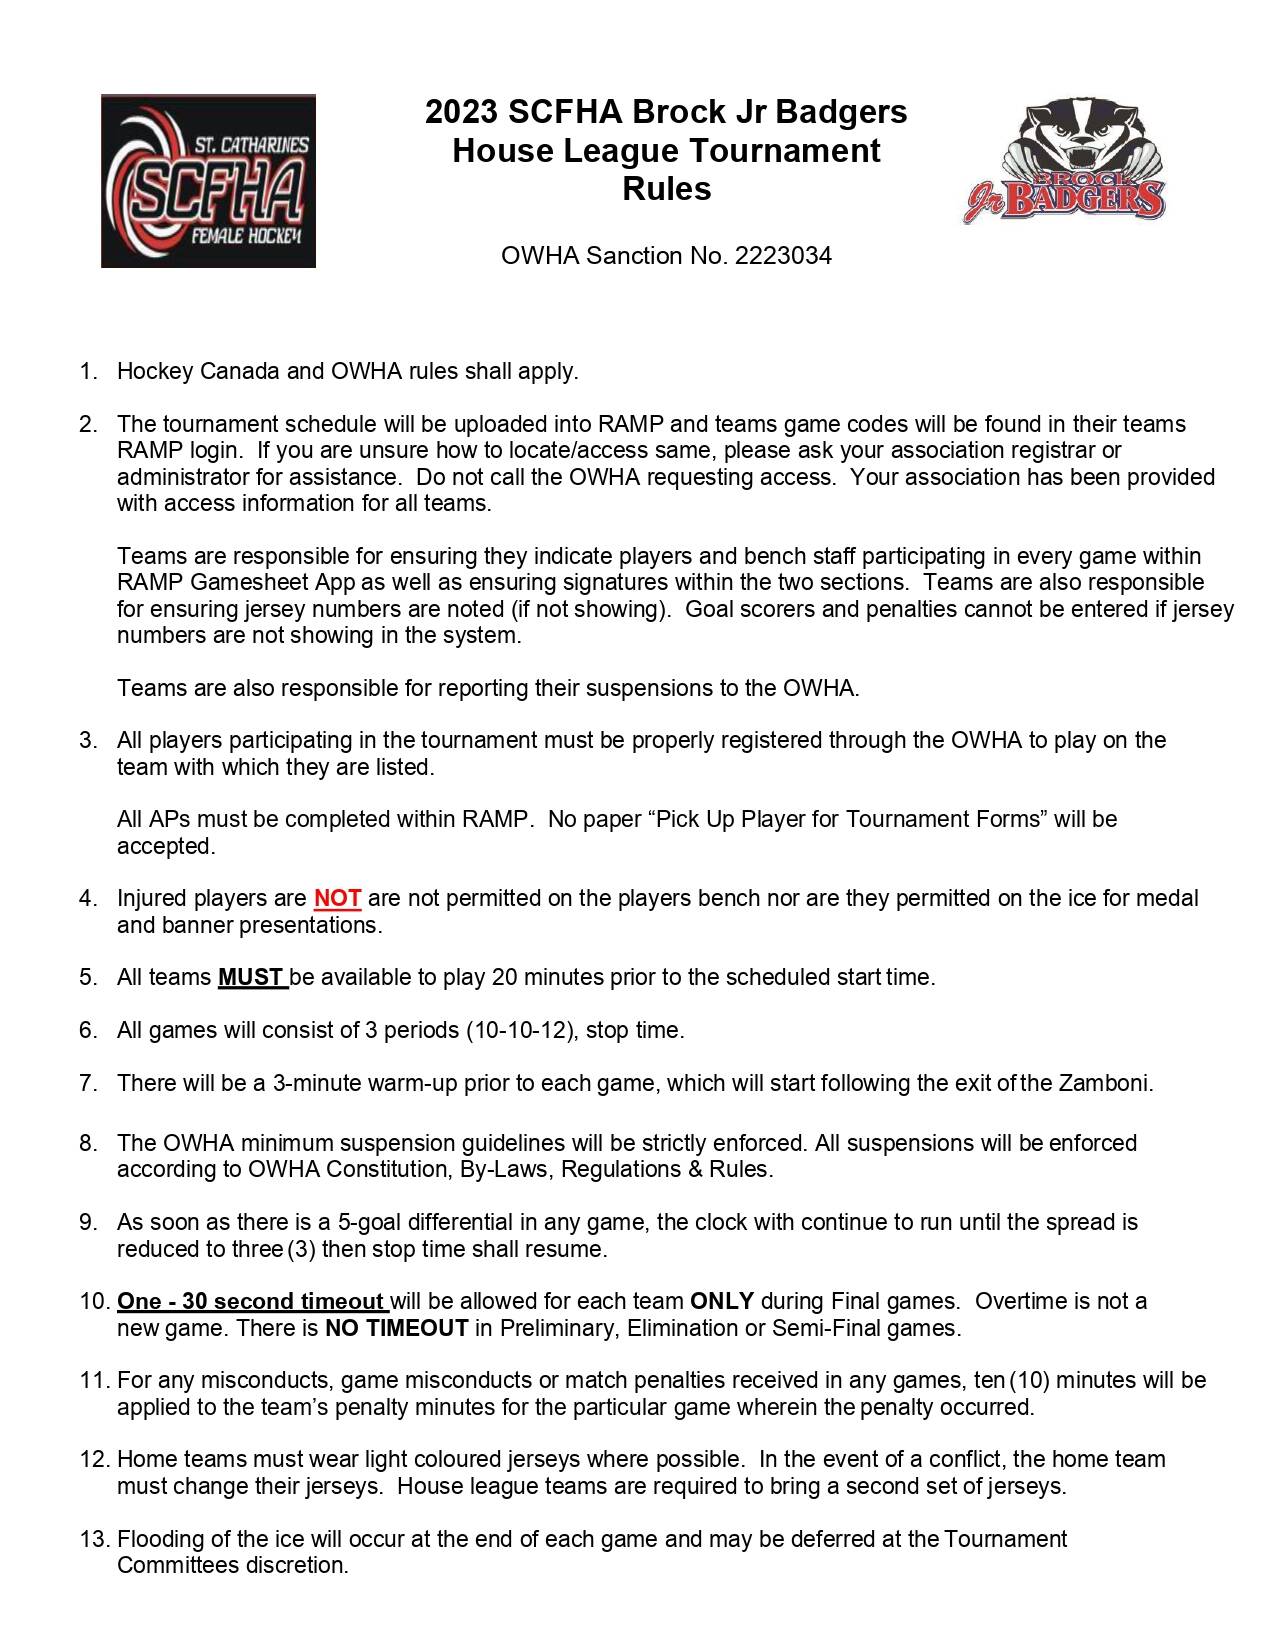 Rules-St-Catharines-HL_page-0001.jpg